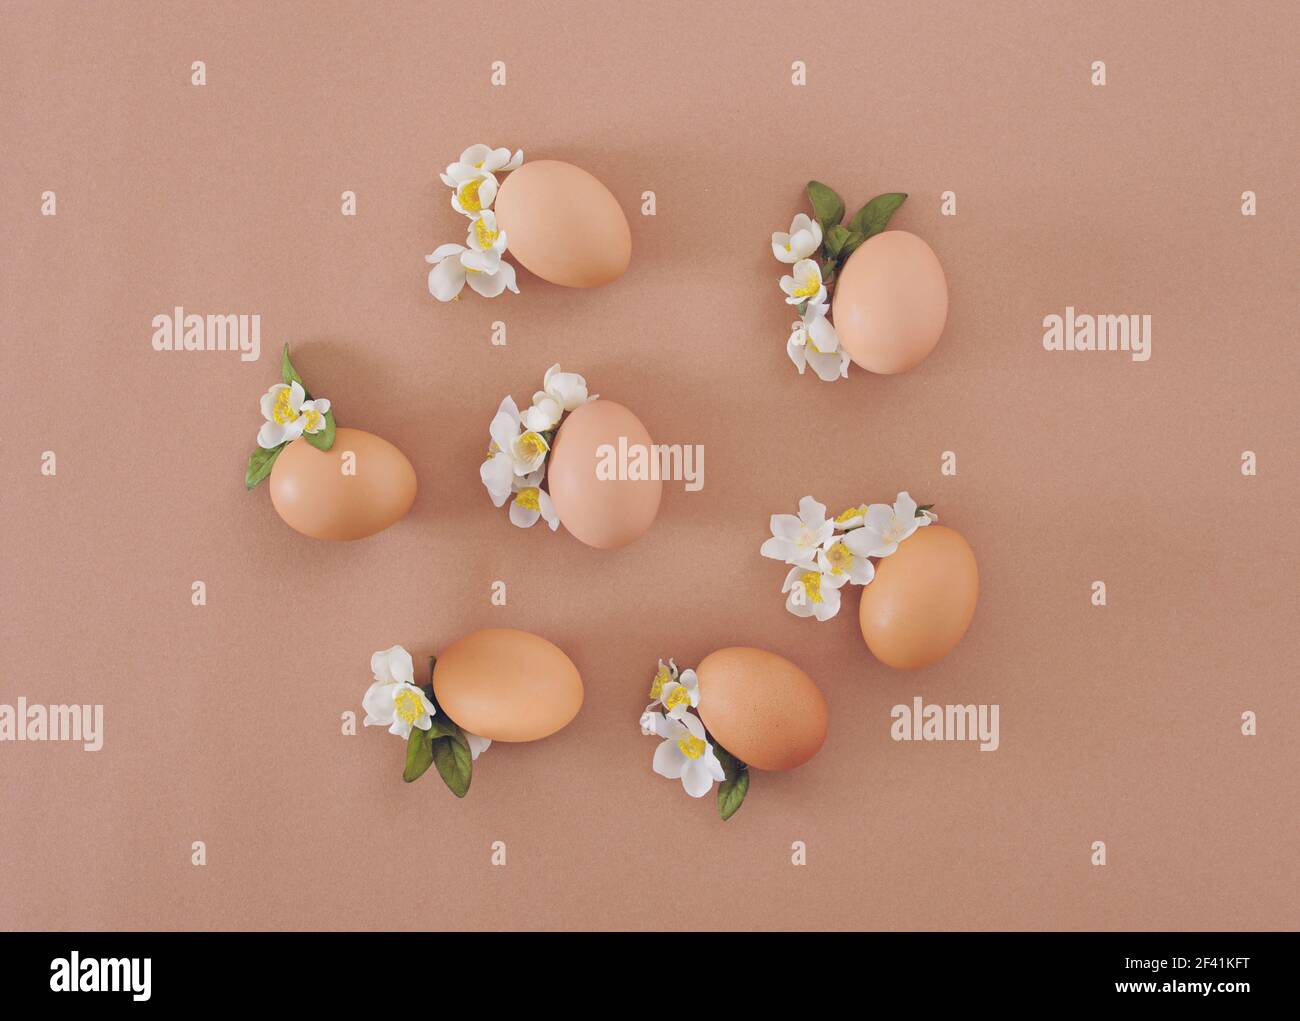 2021 Easter composition. Eggs with white flowers and leaves. Flat lay minimal background. Stock Photo